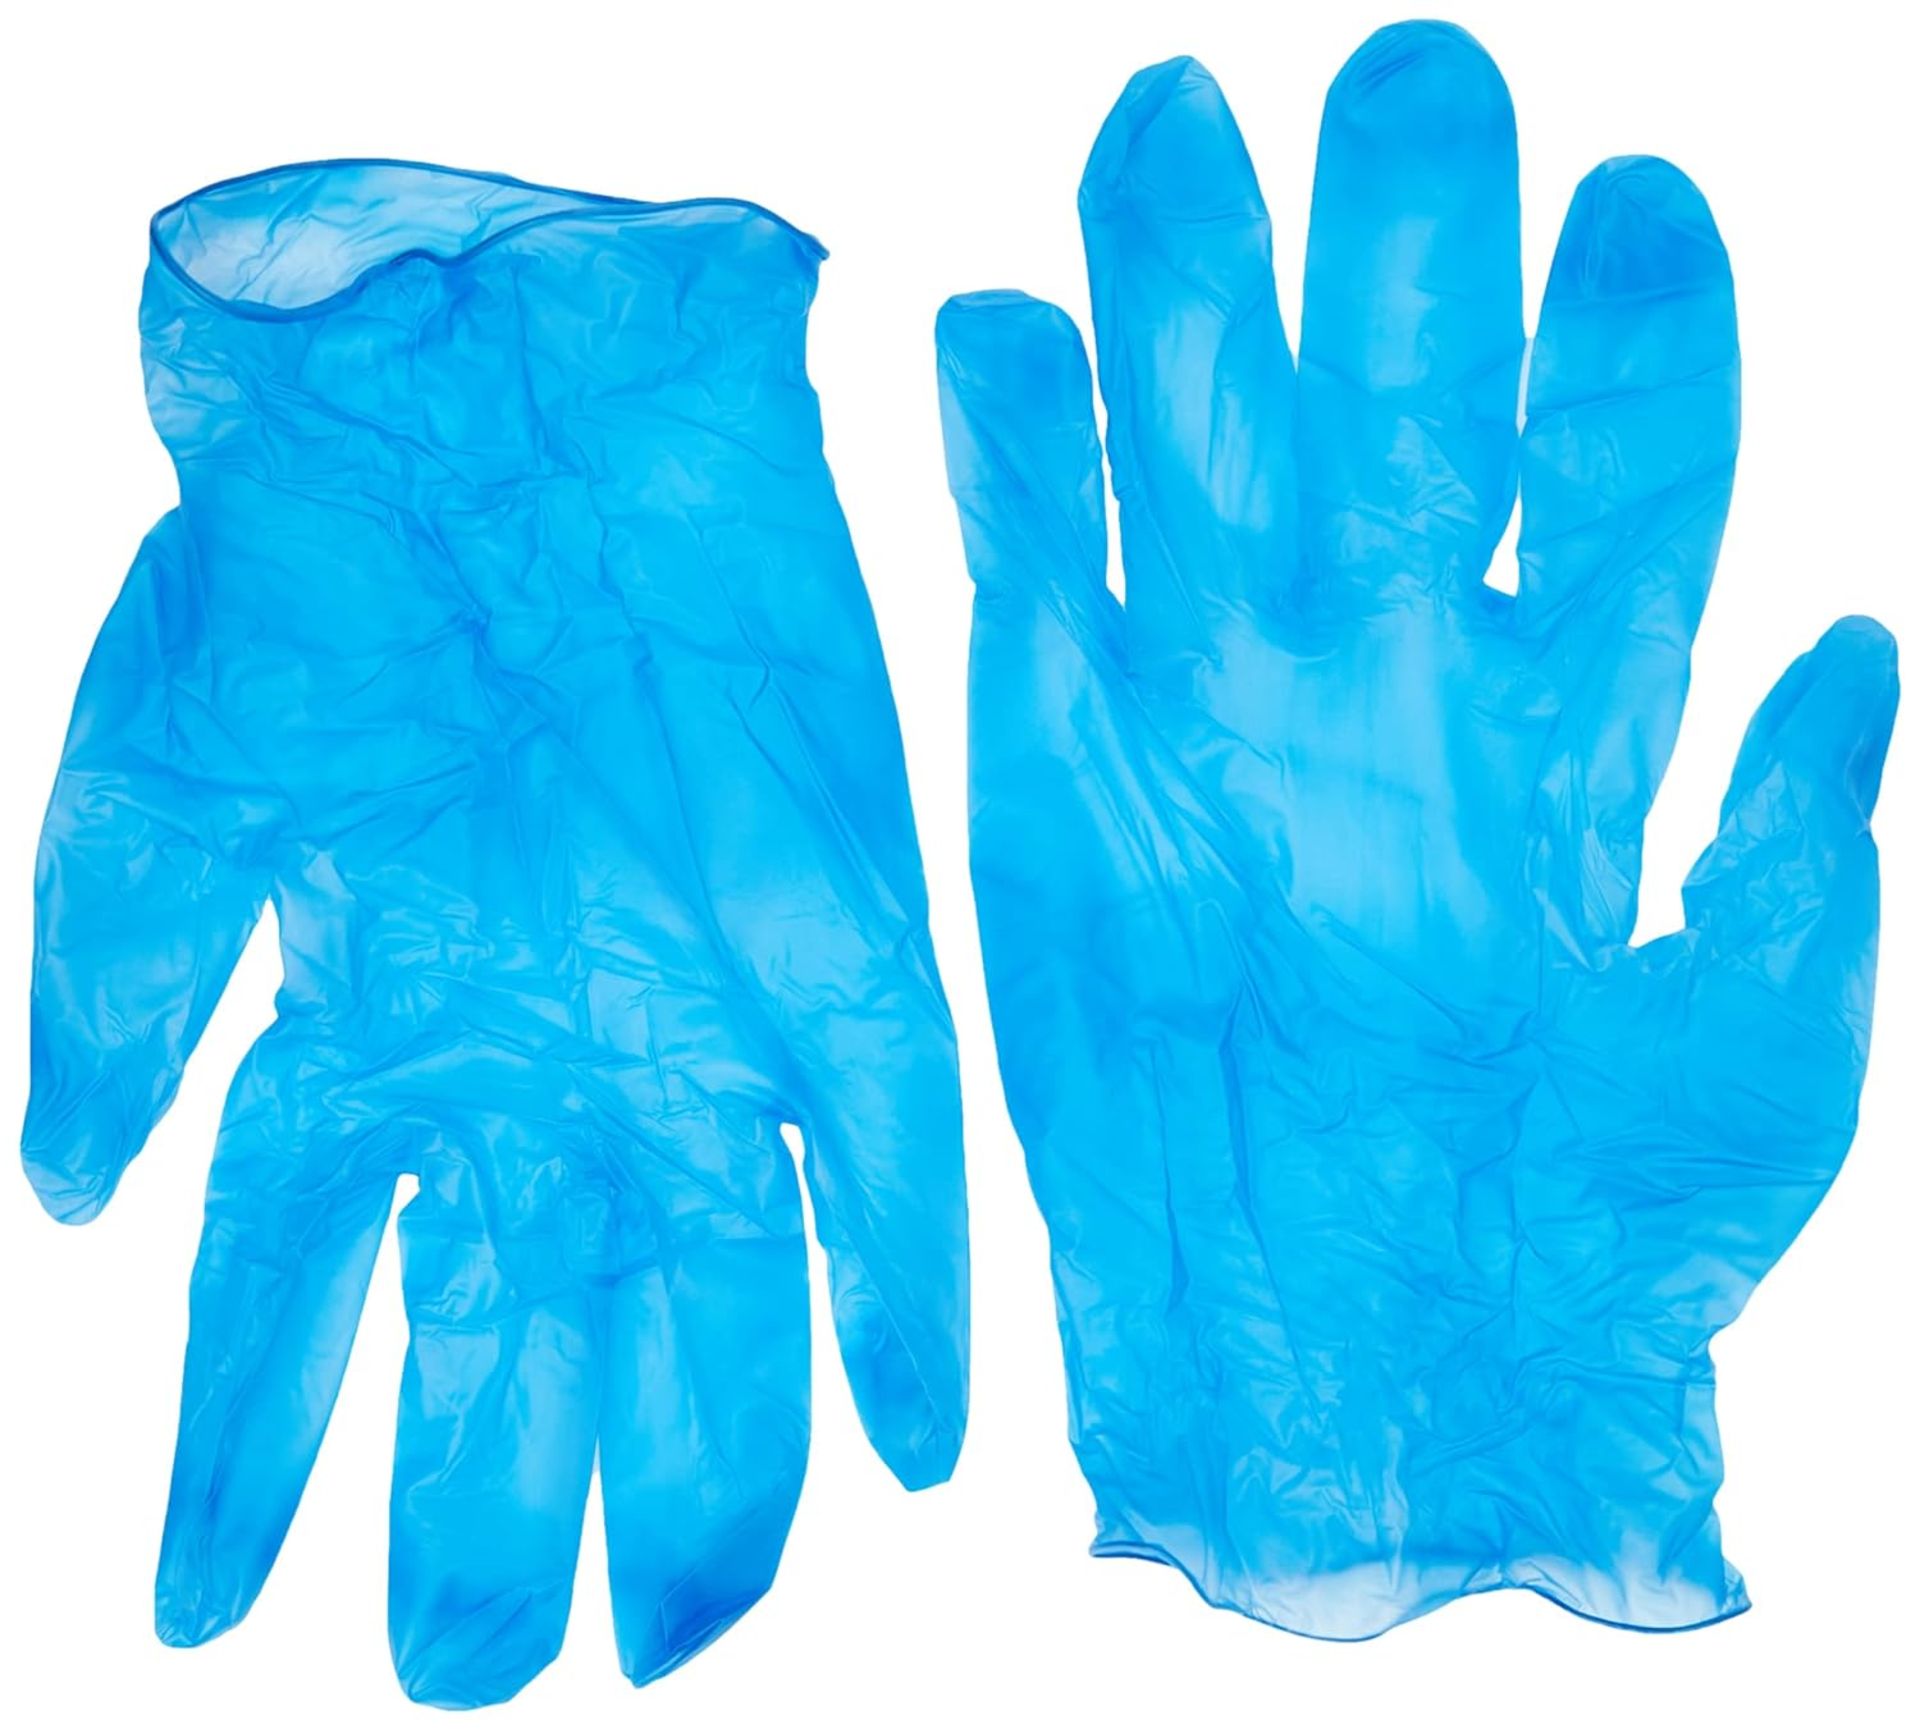 70 X BRAND NEW PACKS OF 100 SAFETOUCH BLUE VINYL GLOVES POWDER FREE SIZE XL BLUE EXP OCT 2026 - Image 2 of 2